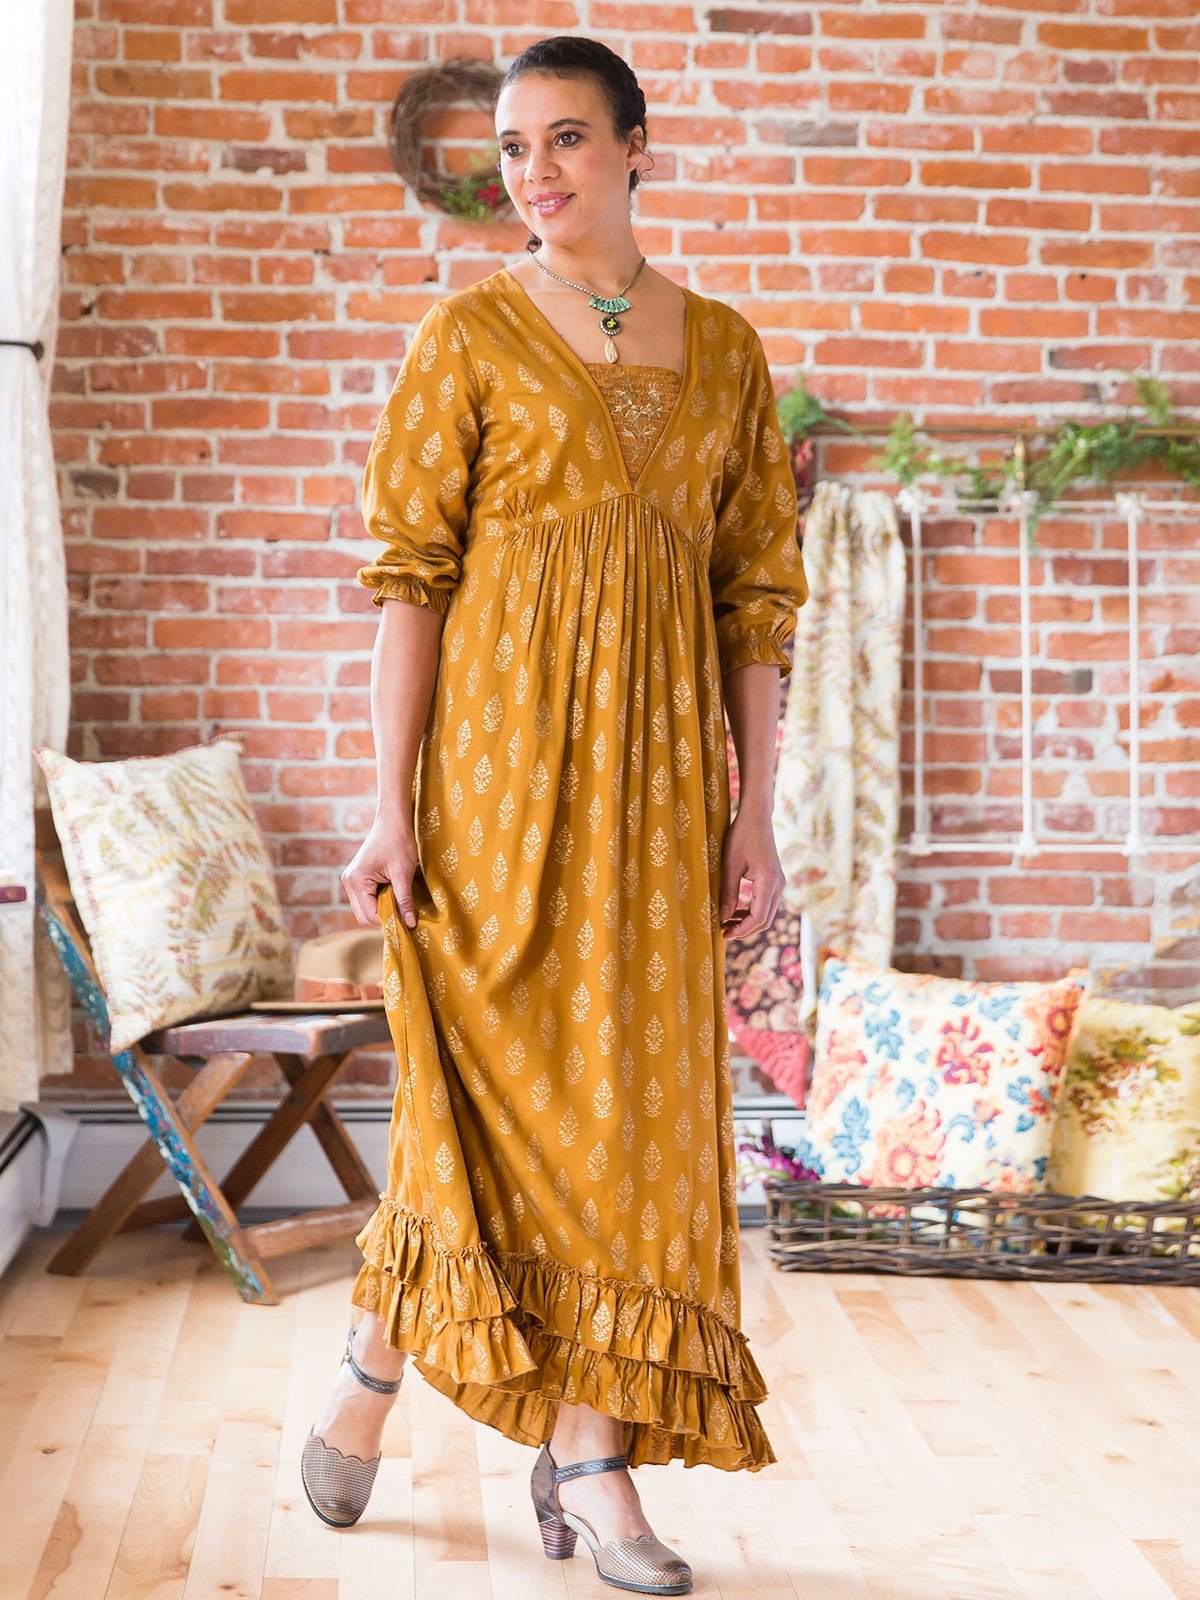 Spirit Dress in Gold | April Cornell - SOLD OUT